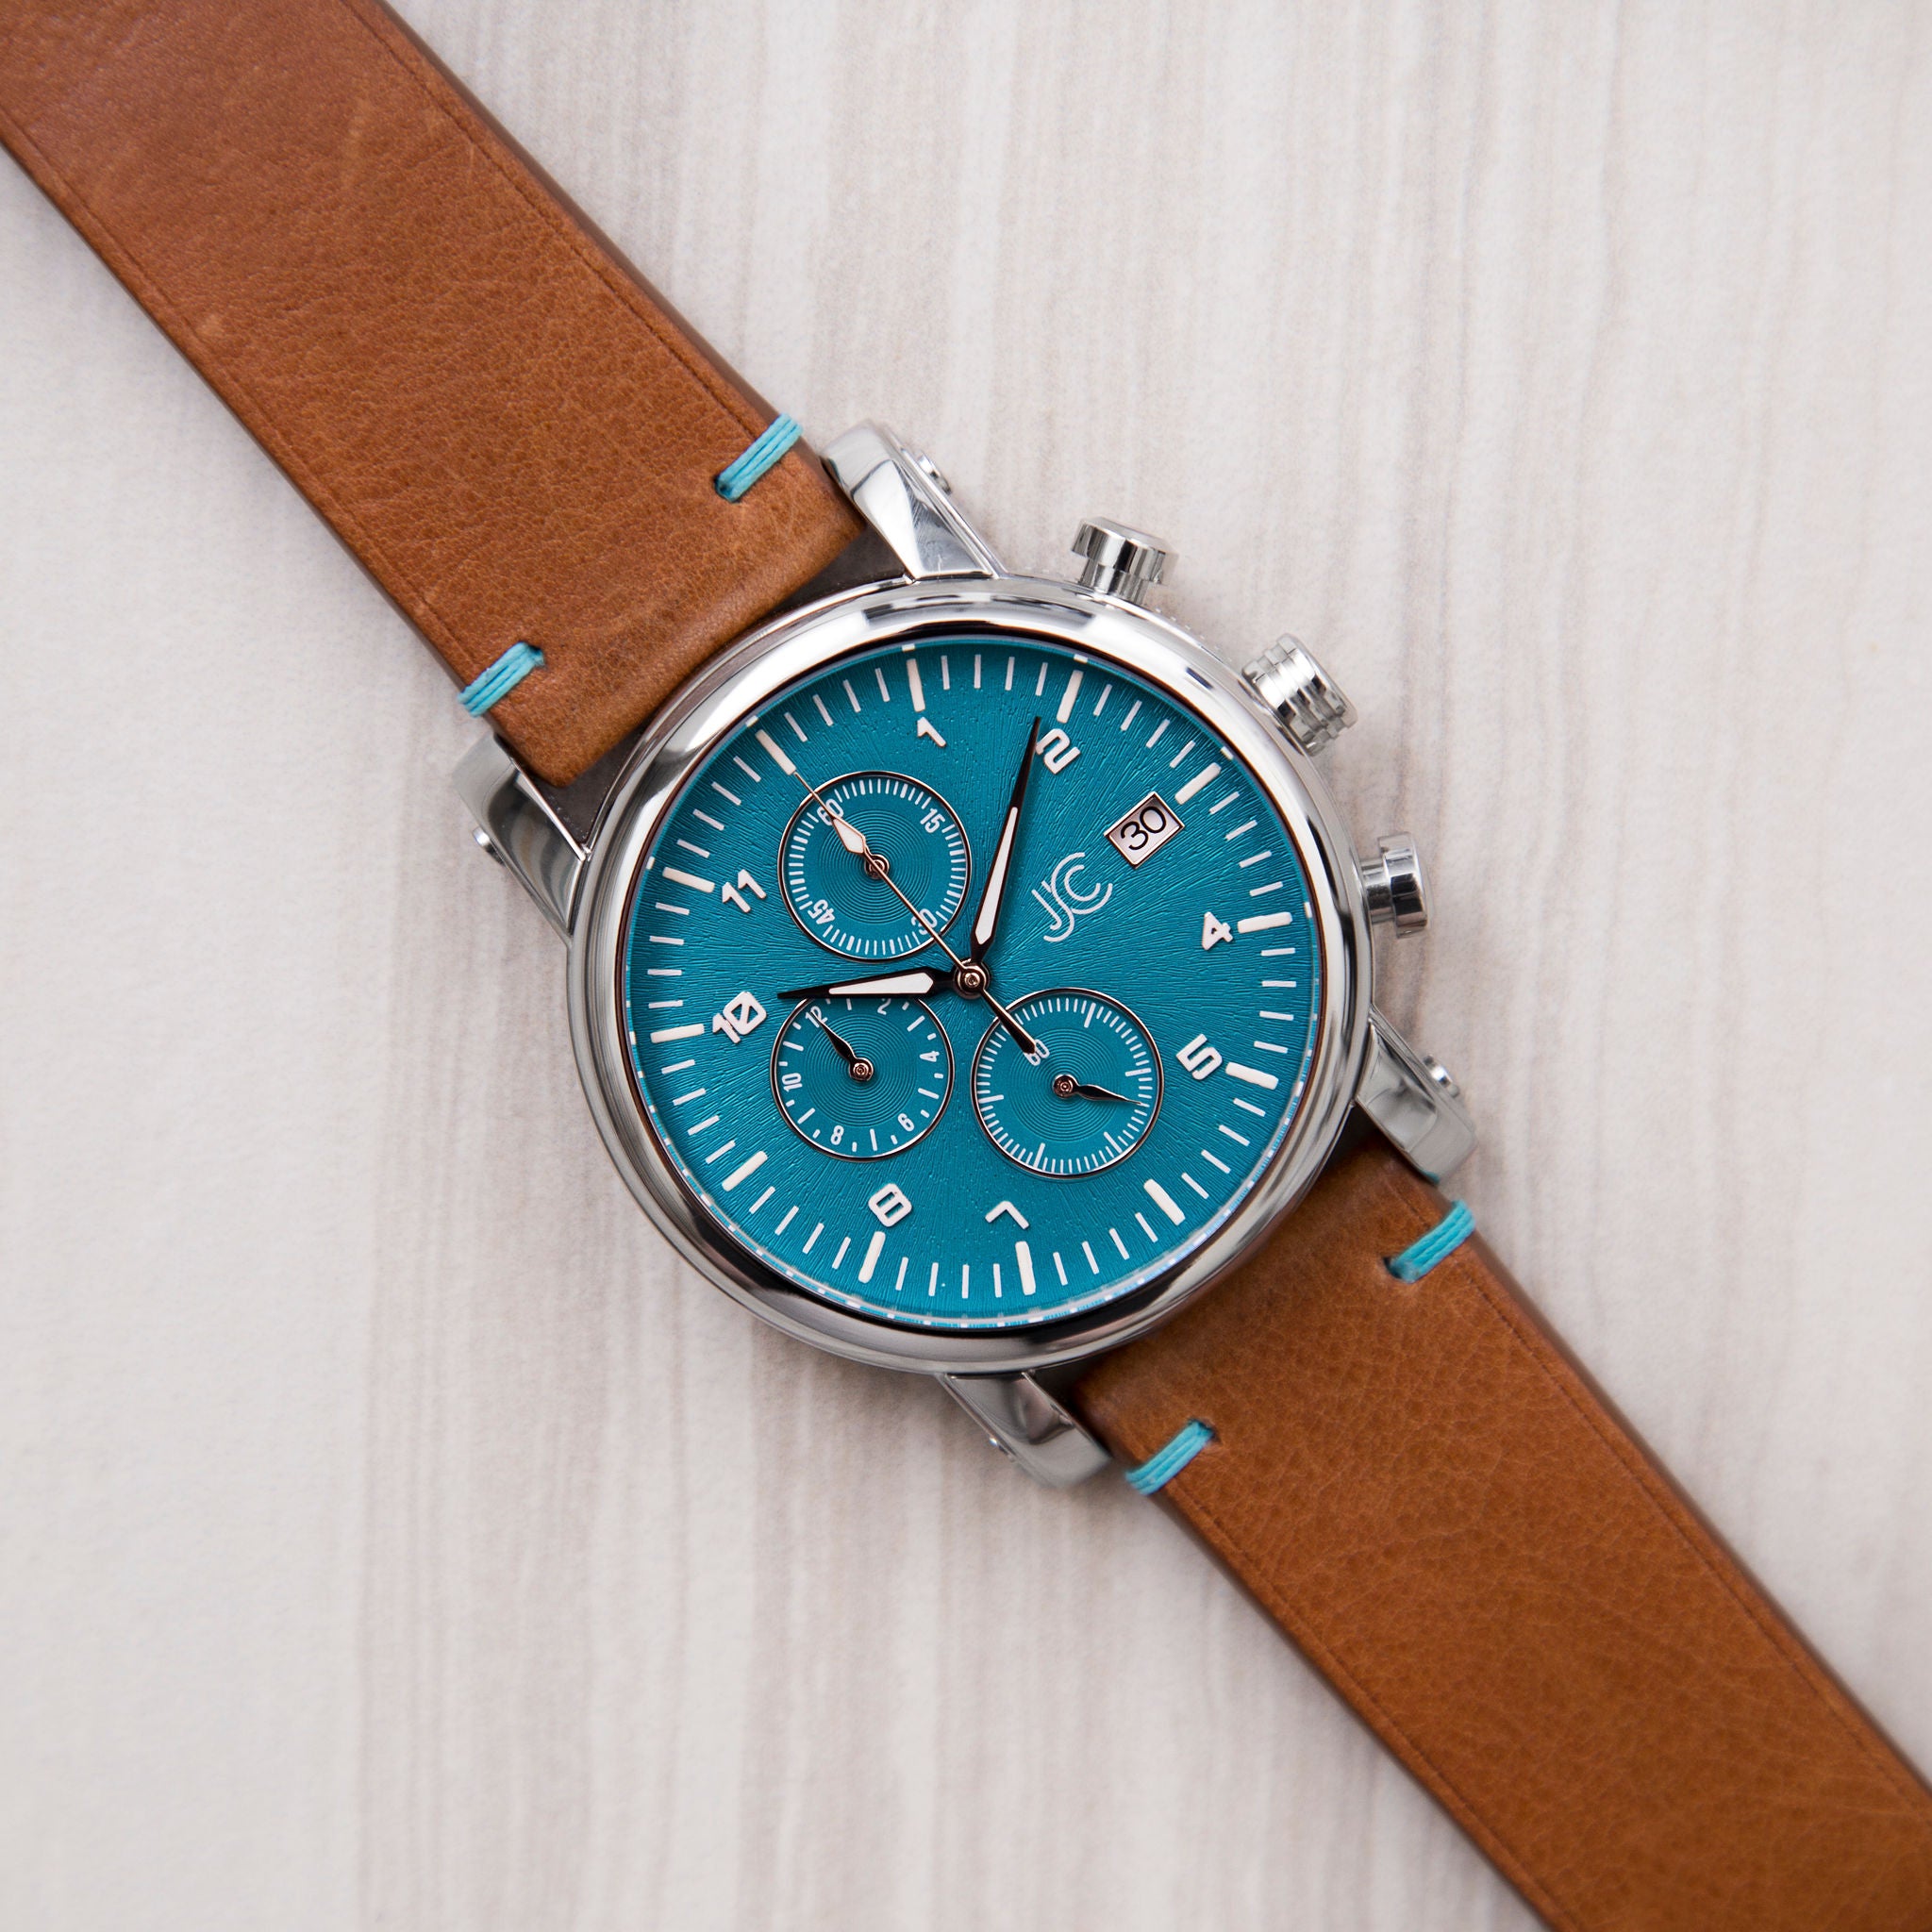 S3 Light Brown Leather Teal Stitch Watch Strap